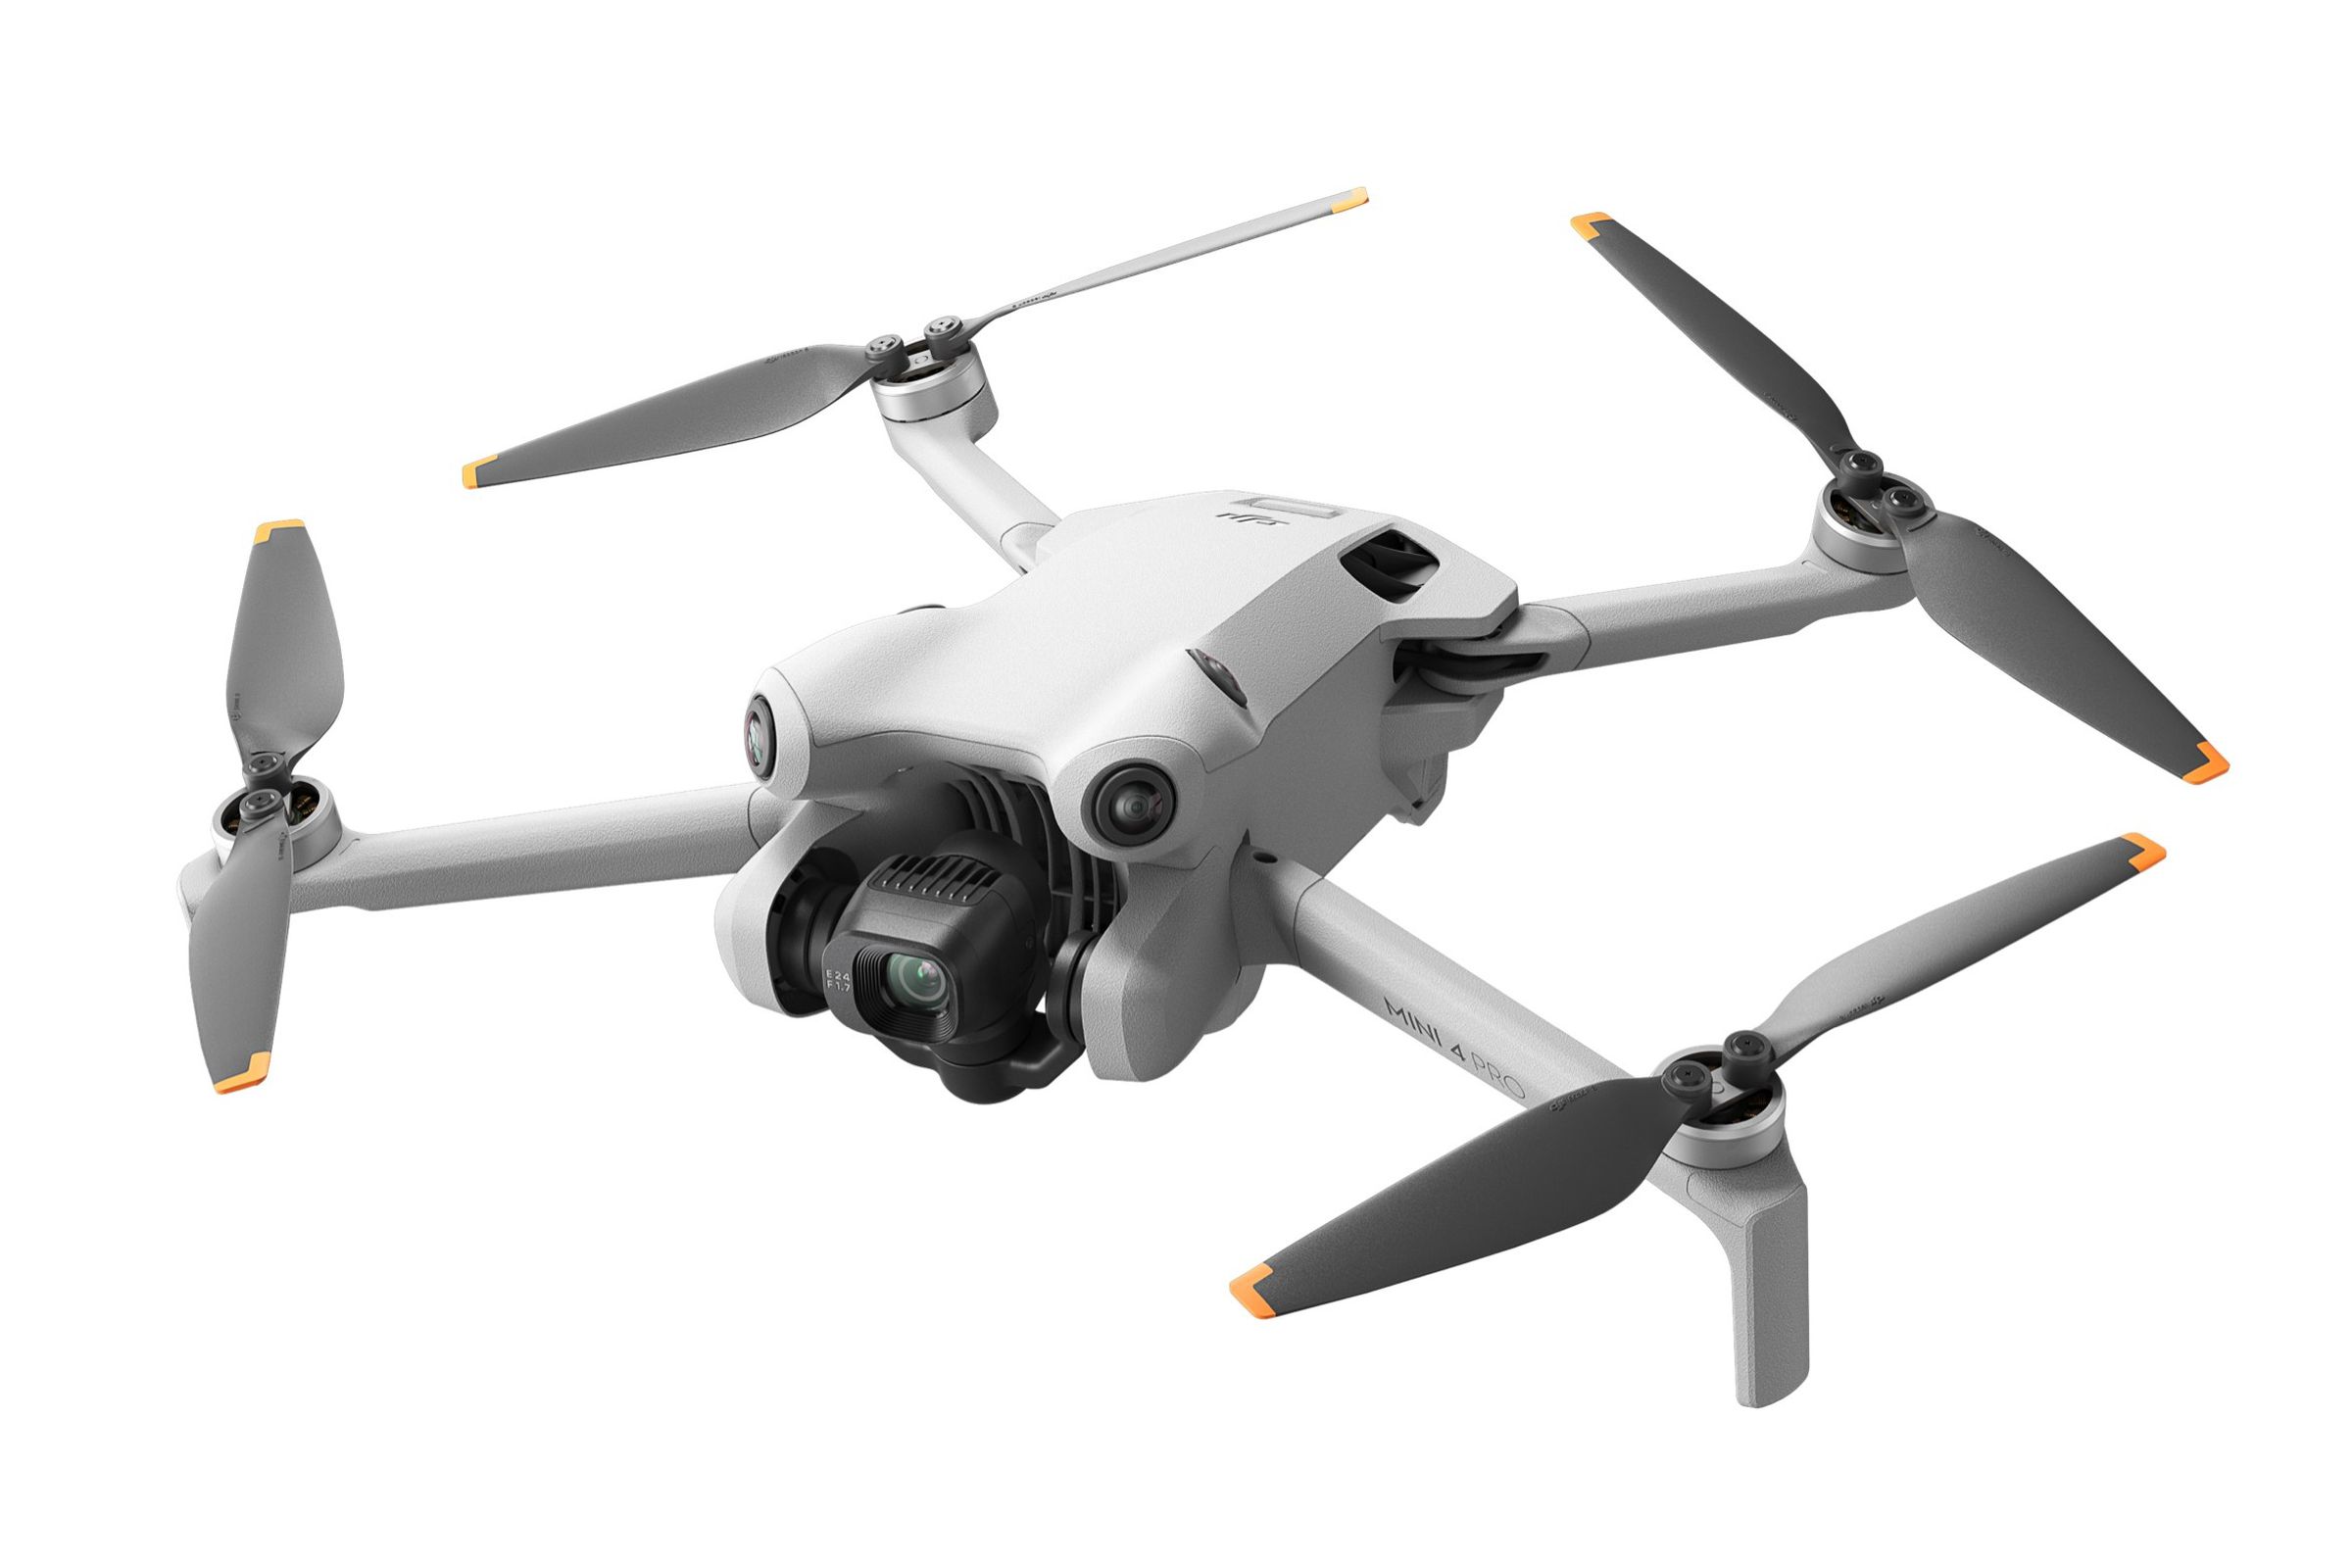 The DJI Mini 4 Pro has bug eyes sticking out in every direction so it doesn’t hit things as much.